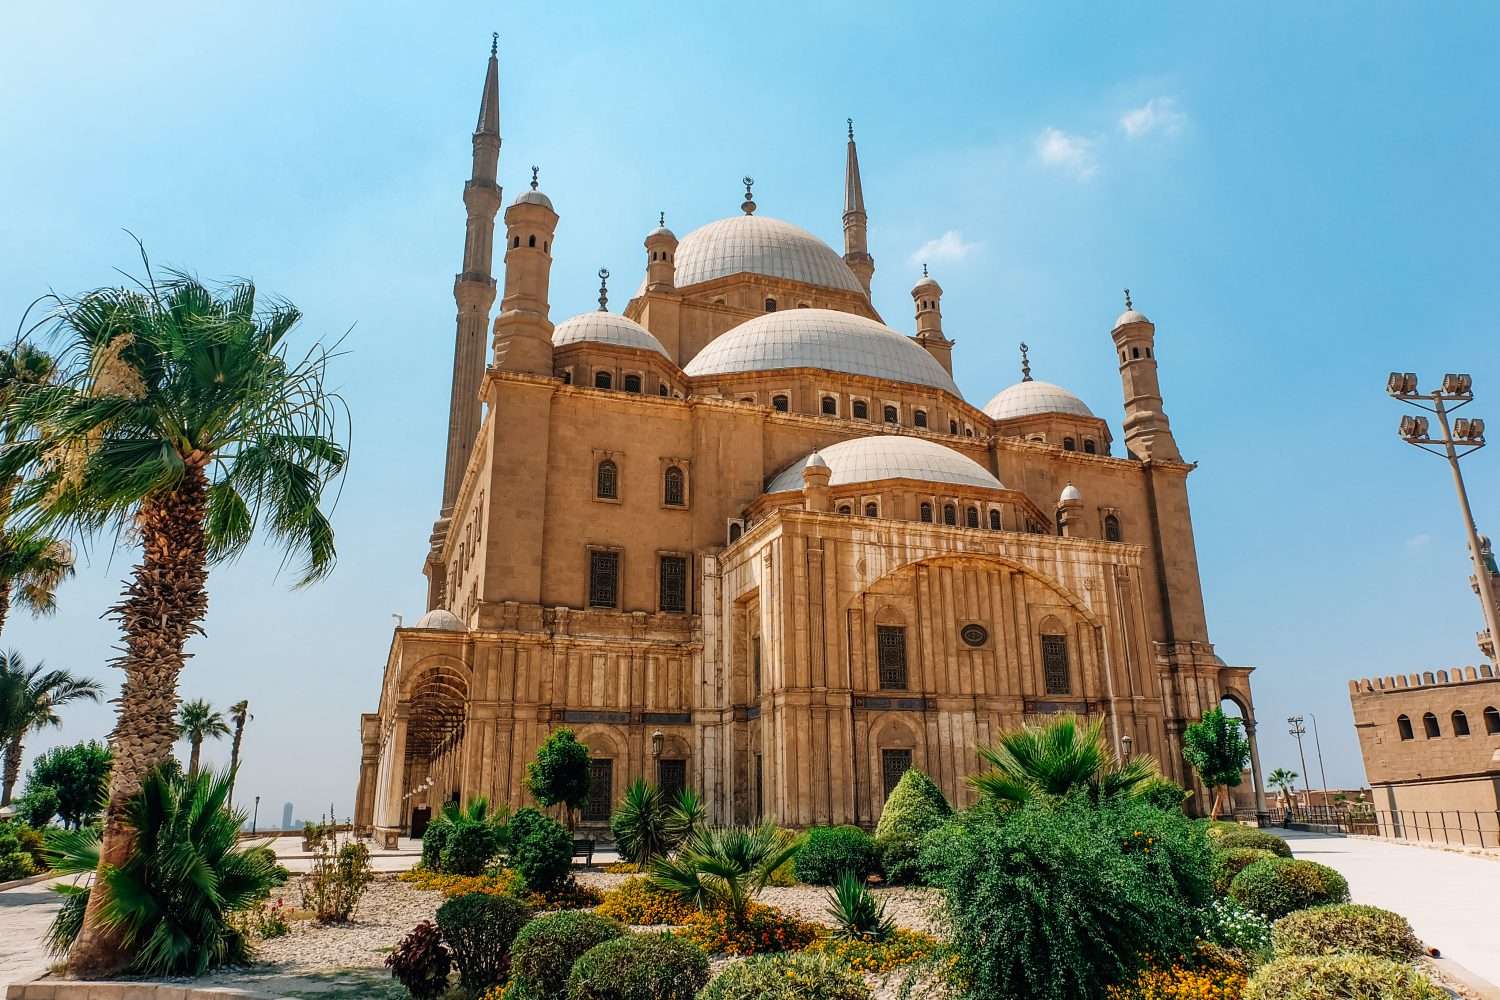 top tours in cairo